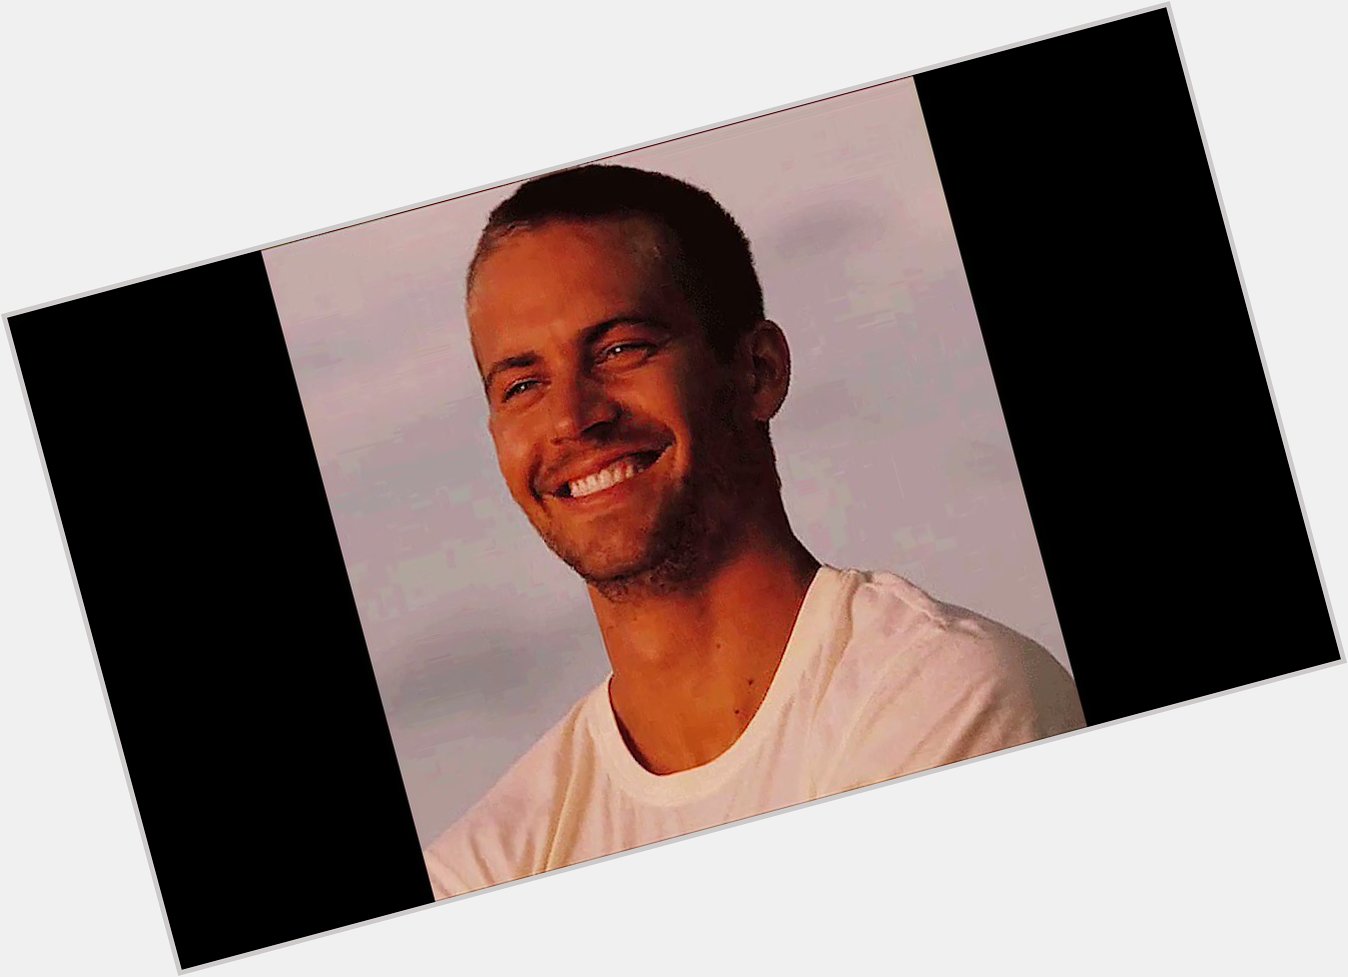 Happy birthday Paul Walker, you are missed every day... The actor would\ve been 45 today 